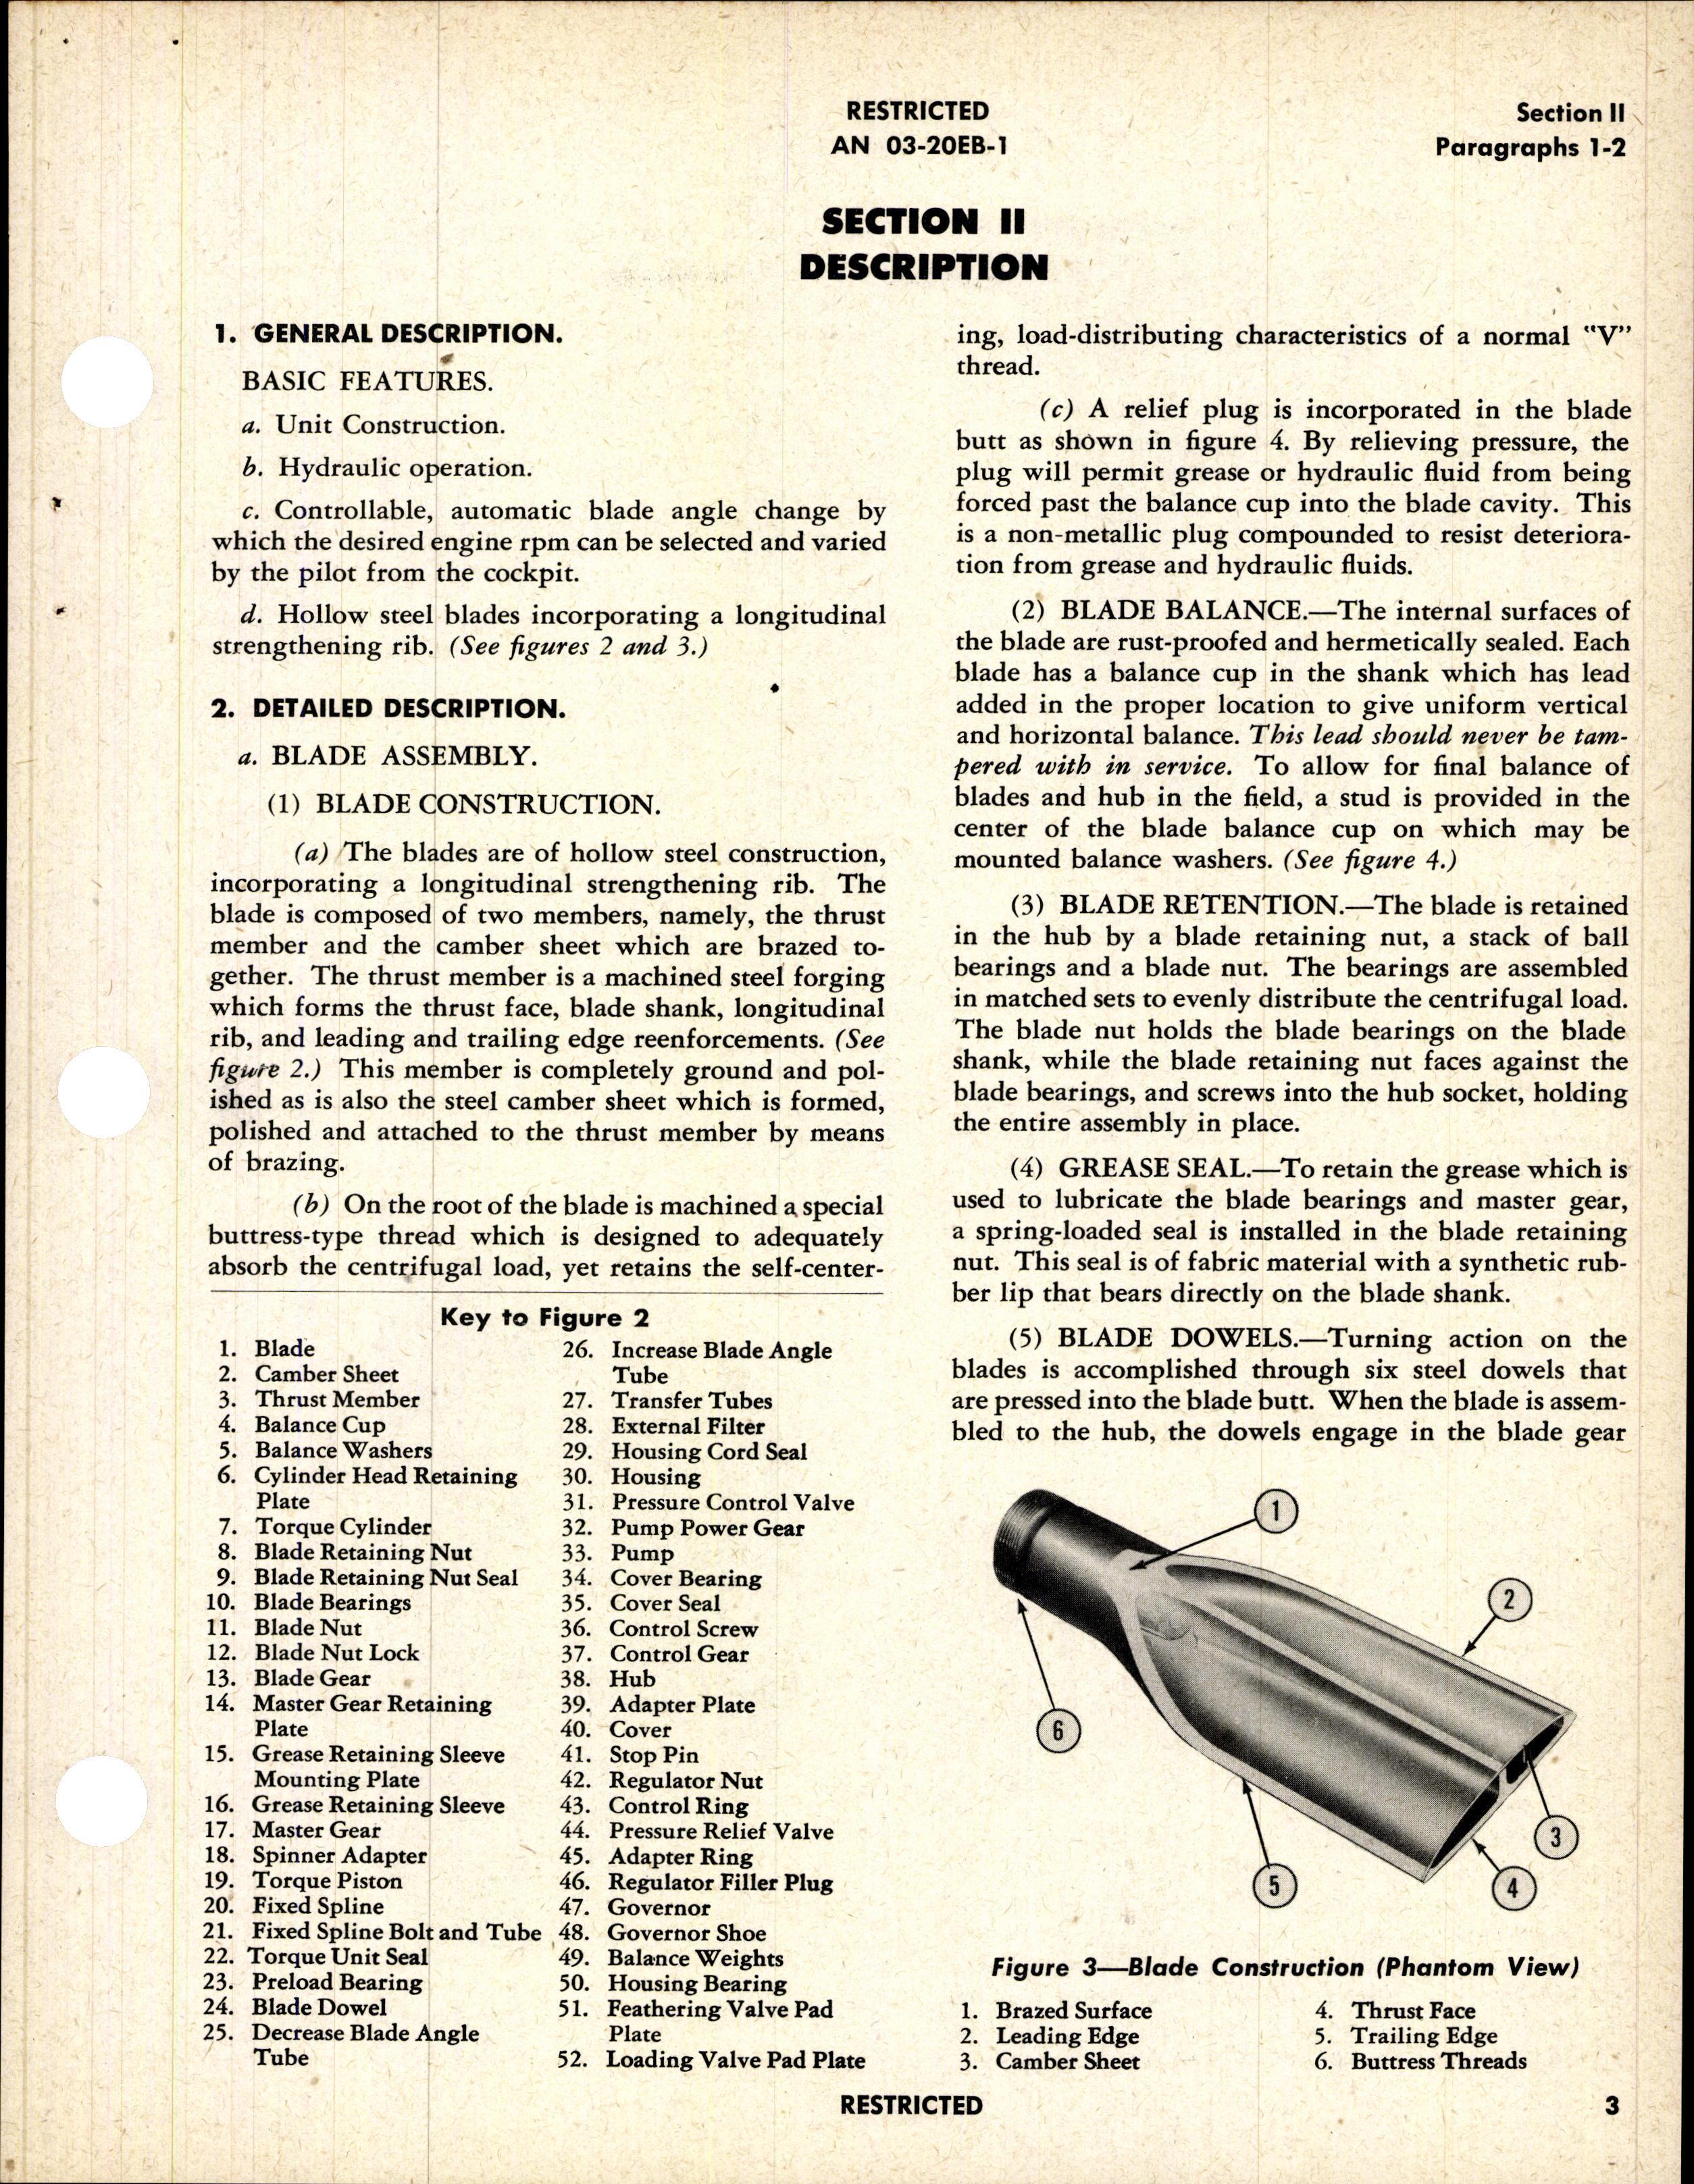 Sample page 7 from AirCorps Library document: Handbook of Instructions with Parts Catalog for Hydraulic Controllable Propellers